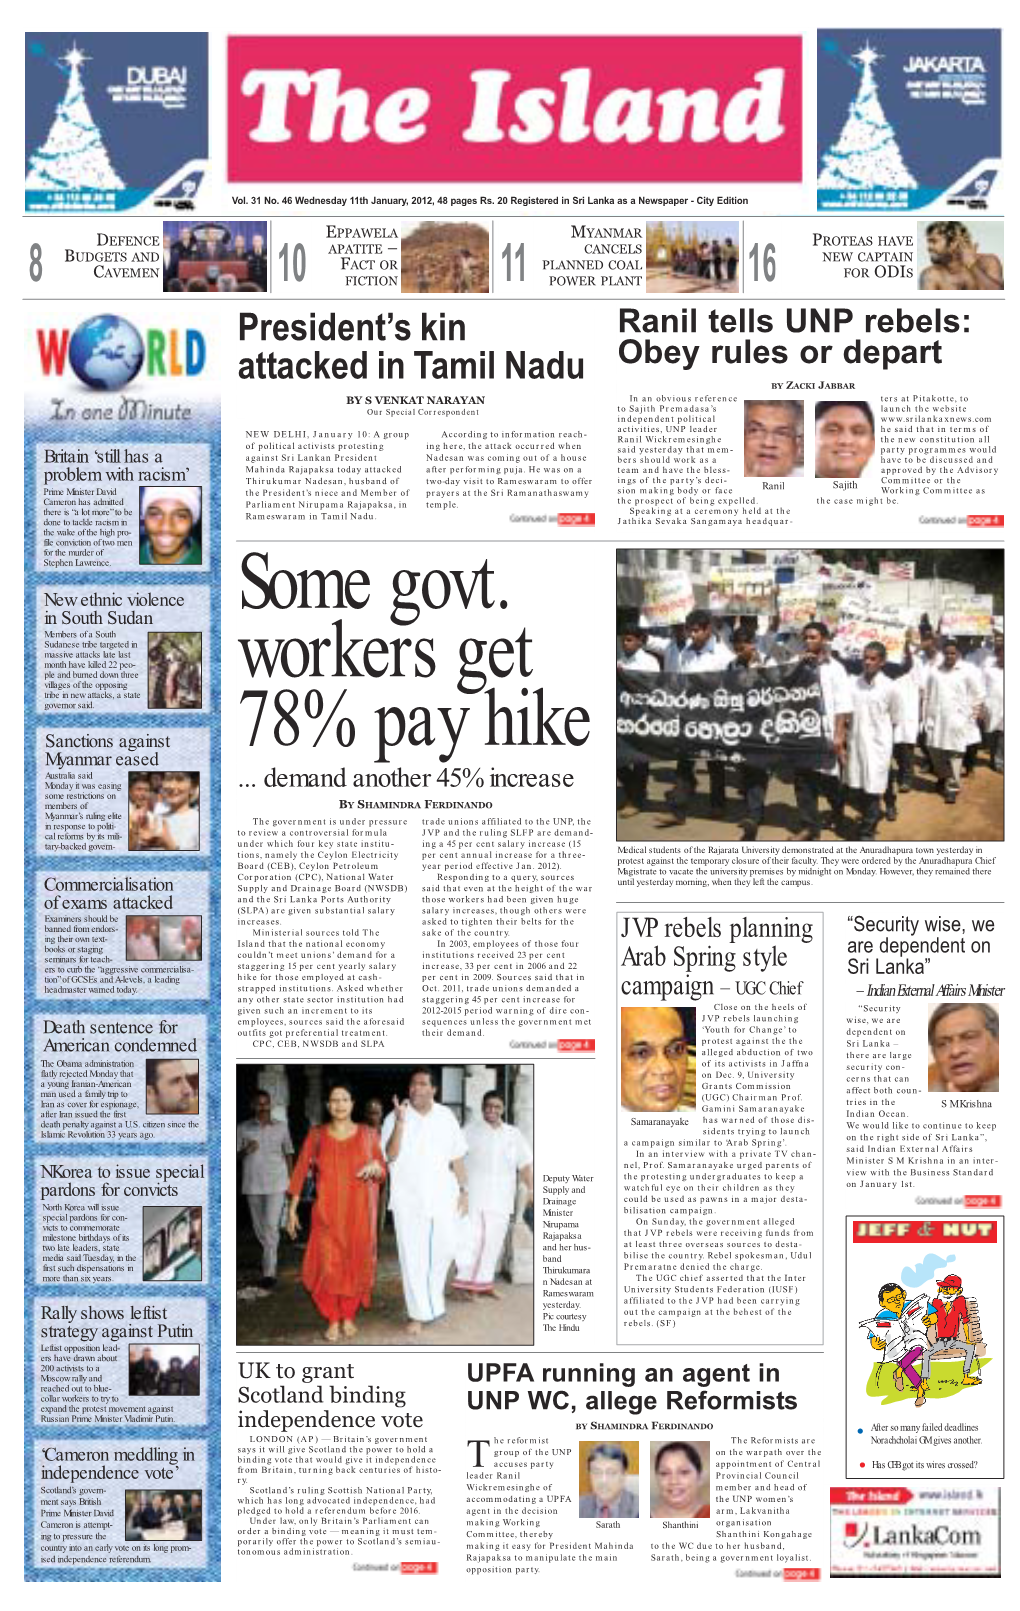 Some Govt. Workers Get 78% Pay Hike